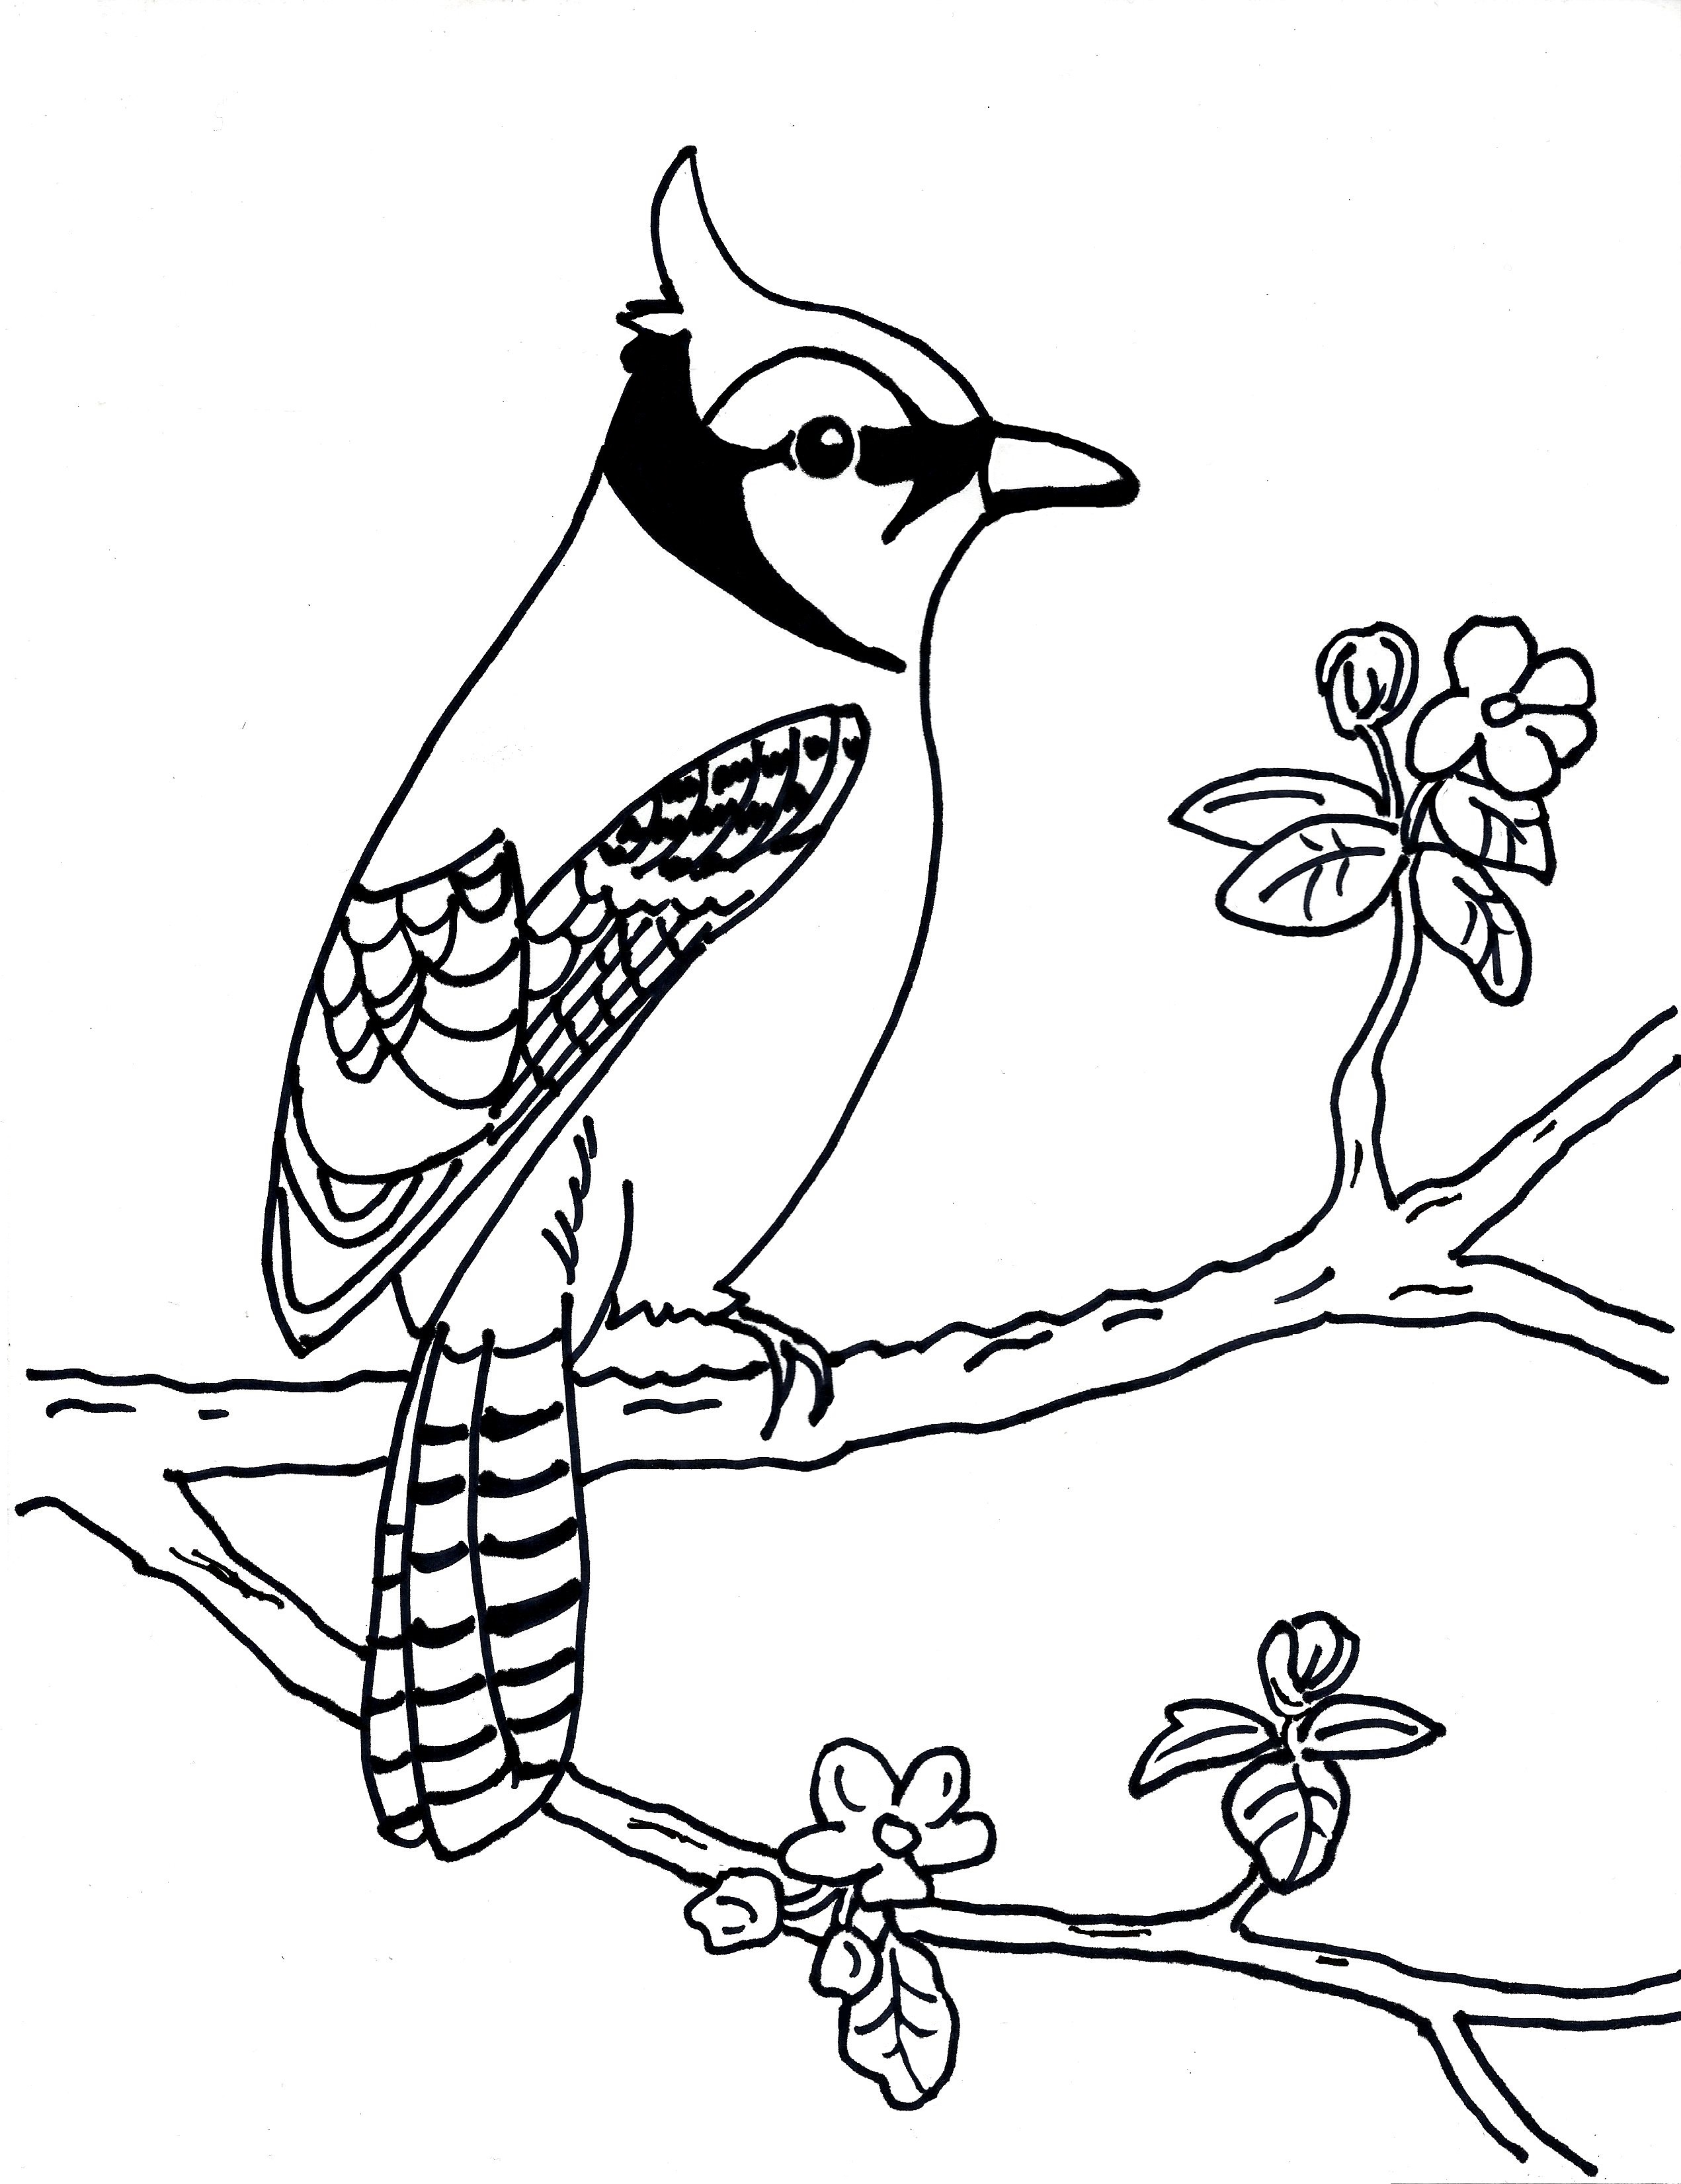 blue jay coloring page3 - Samantha Bell